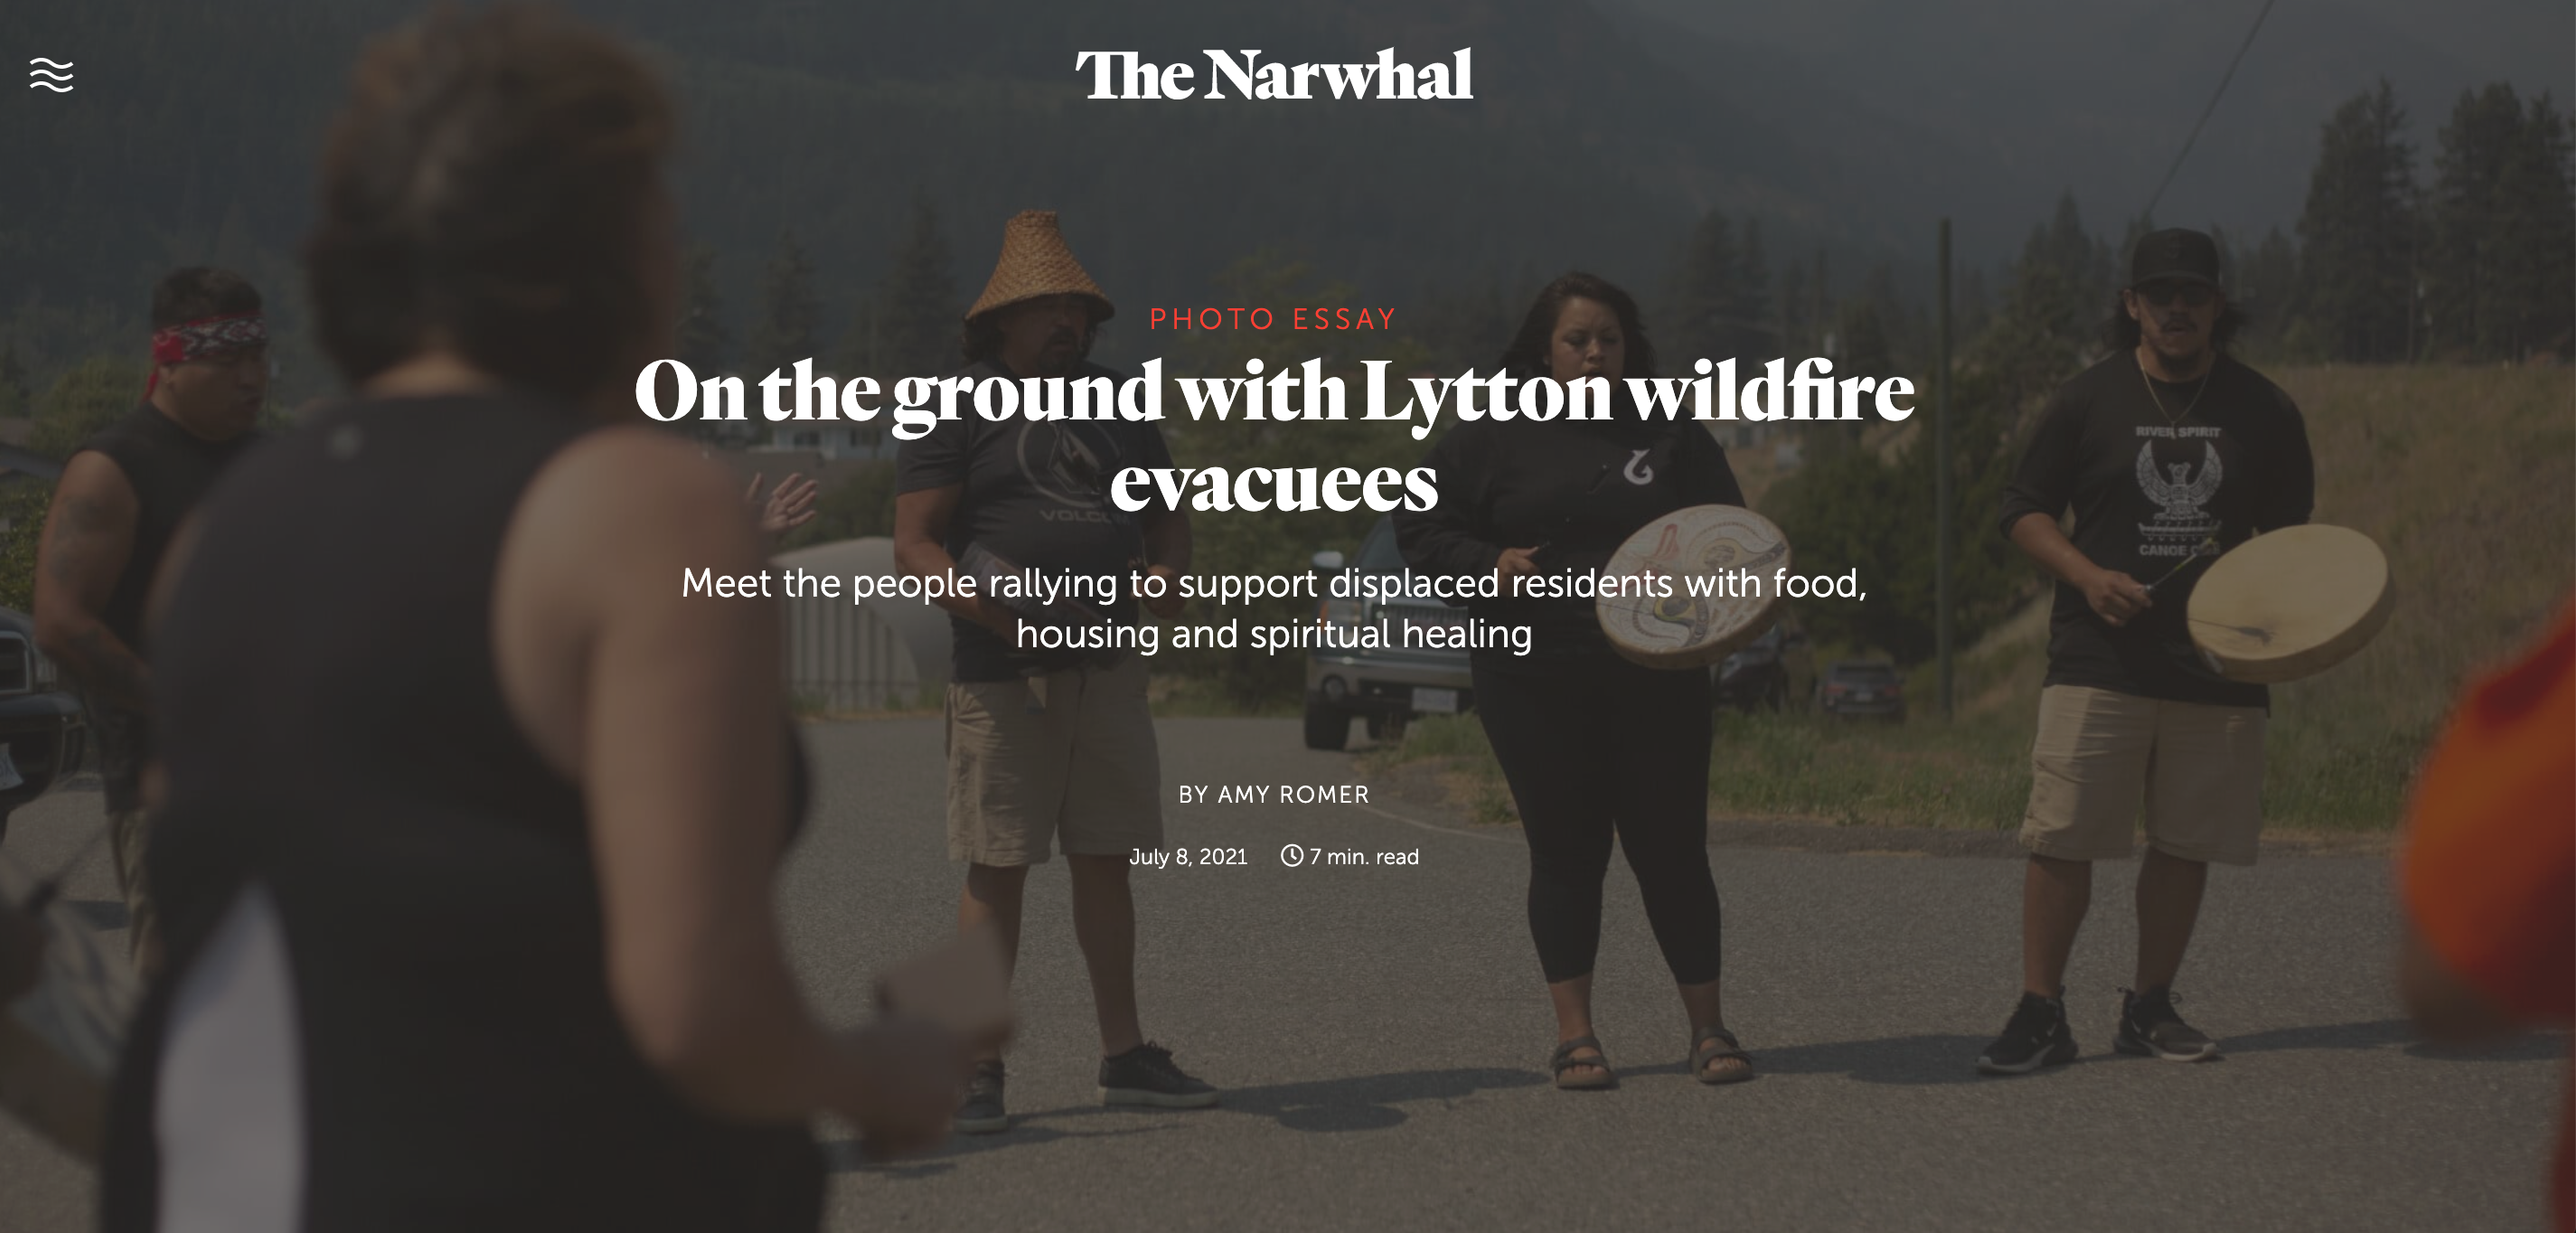 Thumbnail of The Narwhal: On the ground with Lytton wildfire evacuees